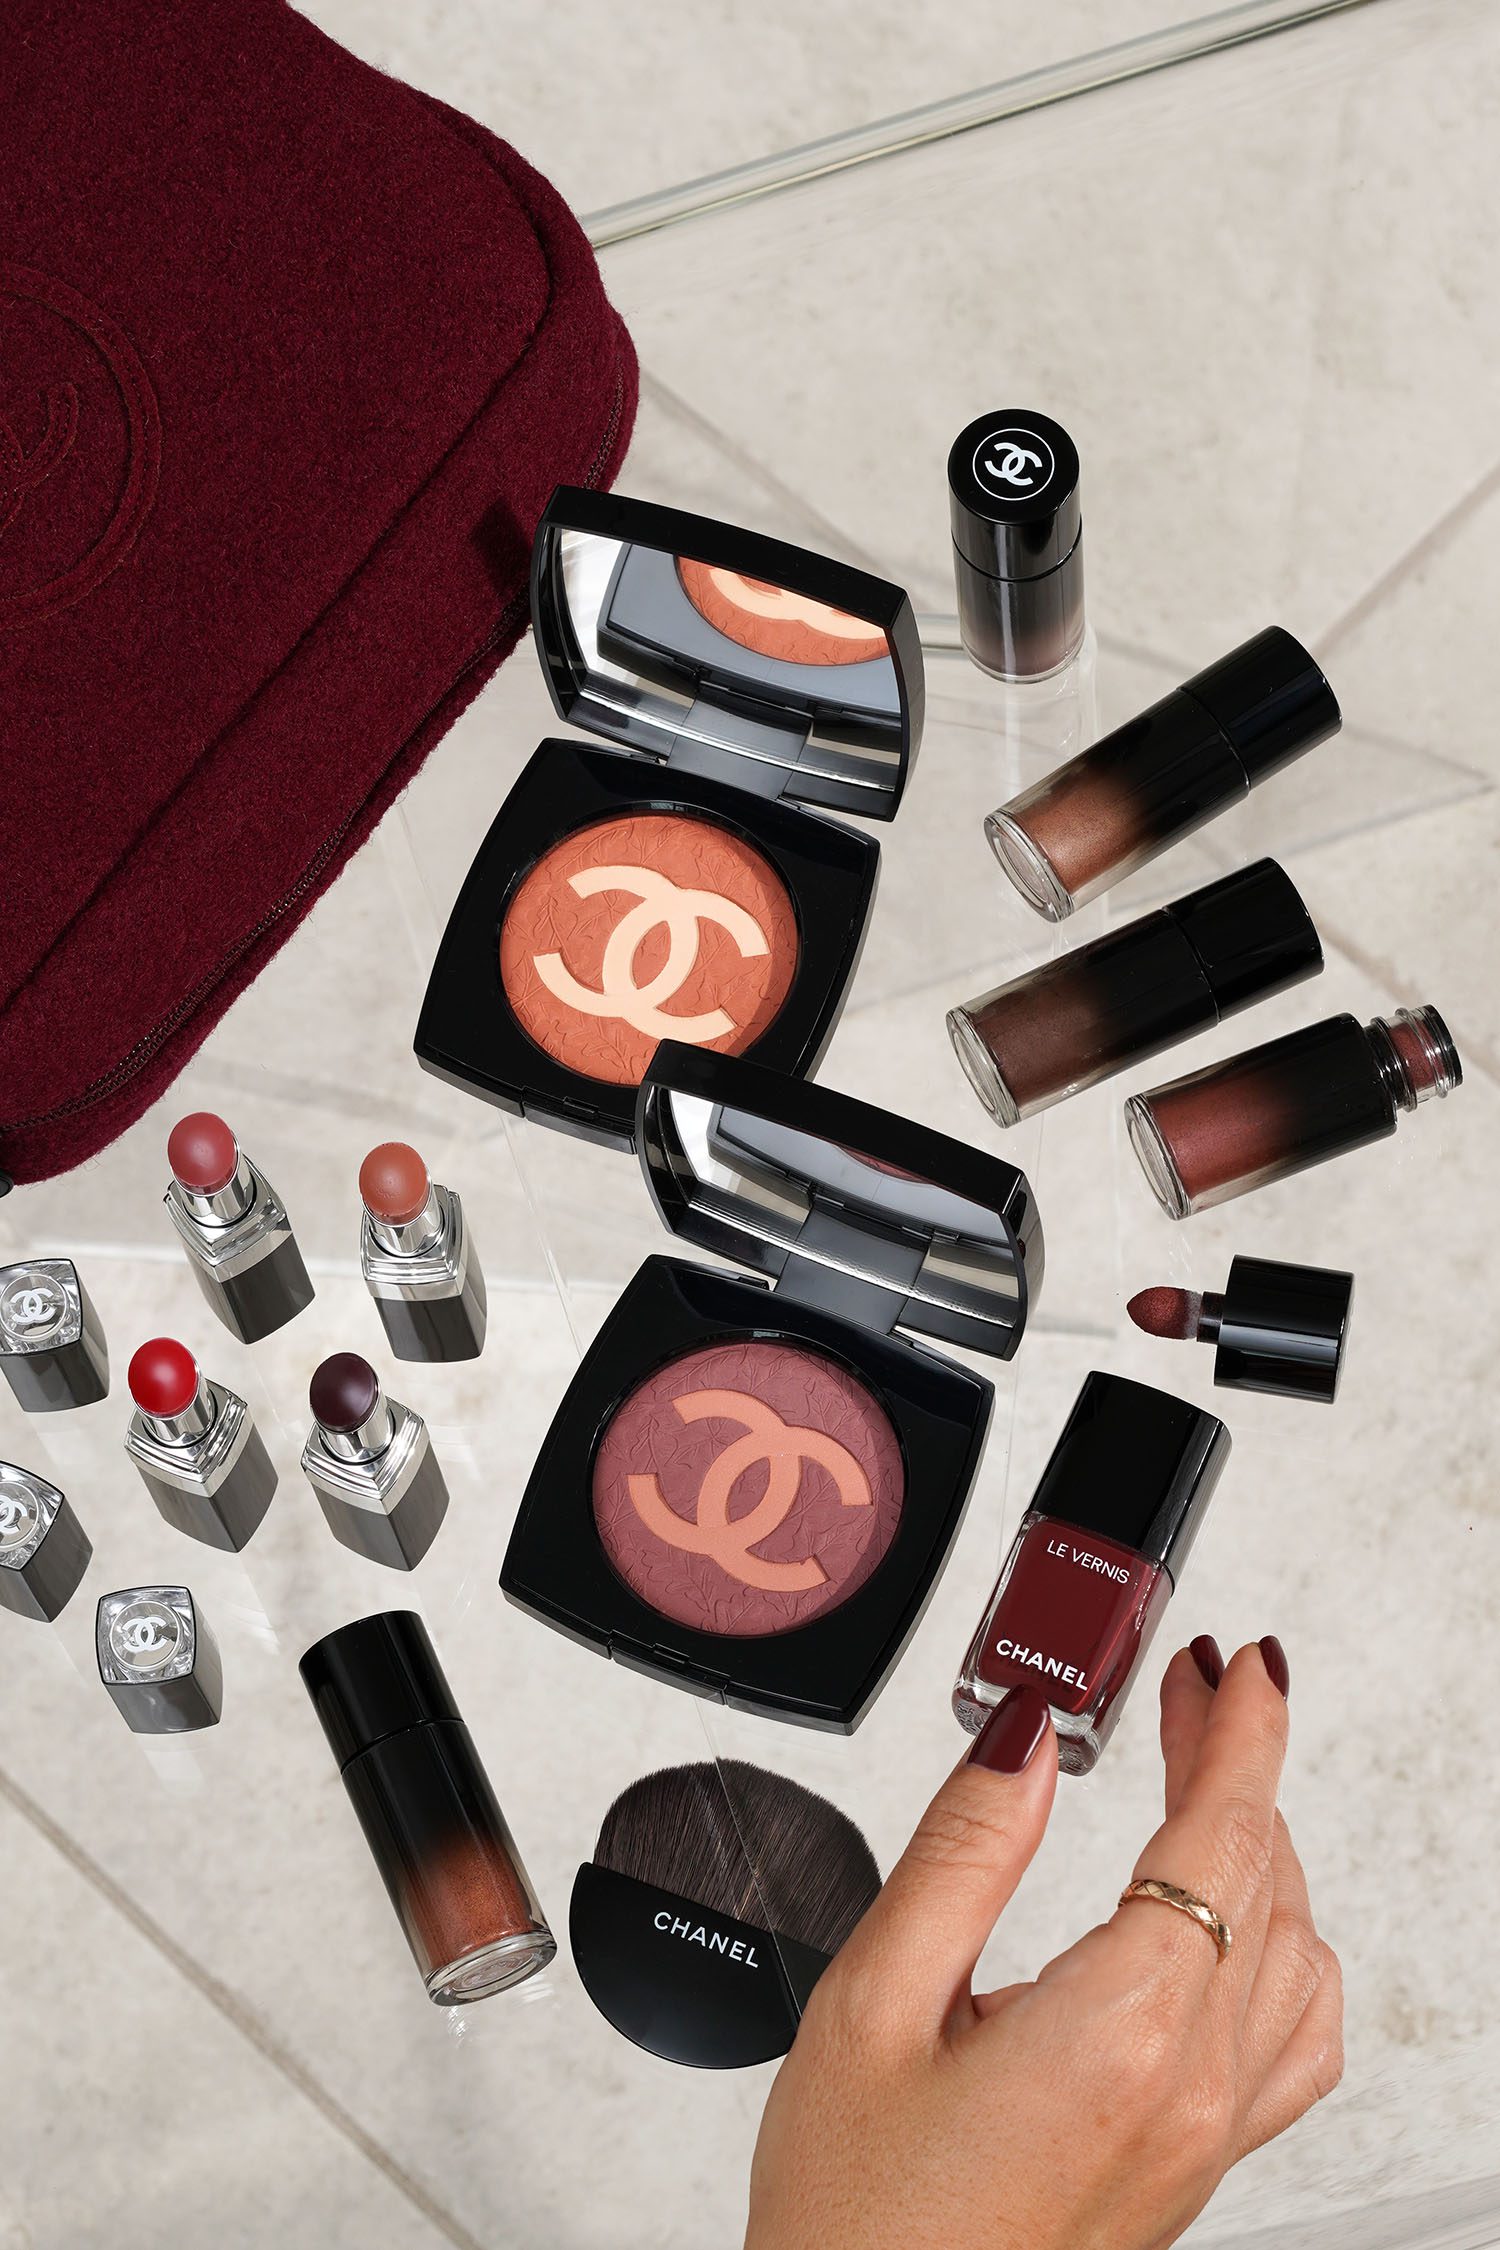 chanel gift sets for women